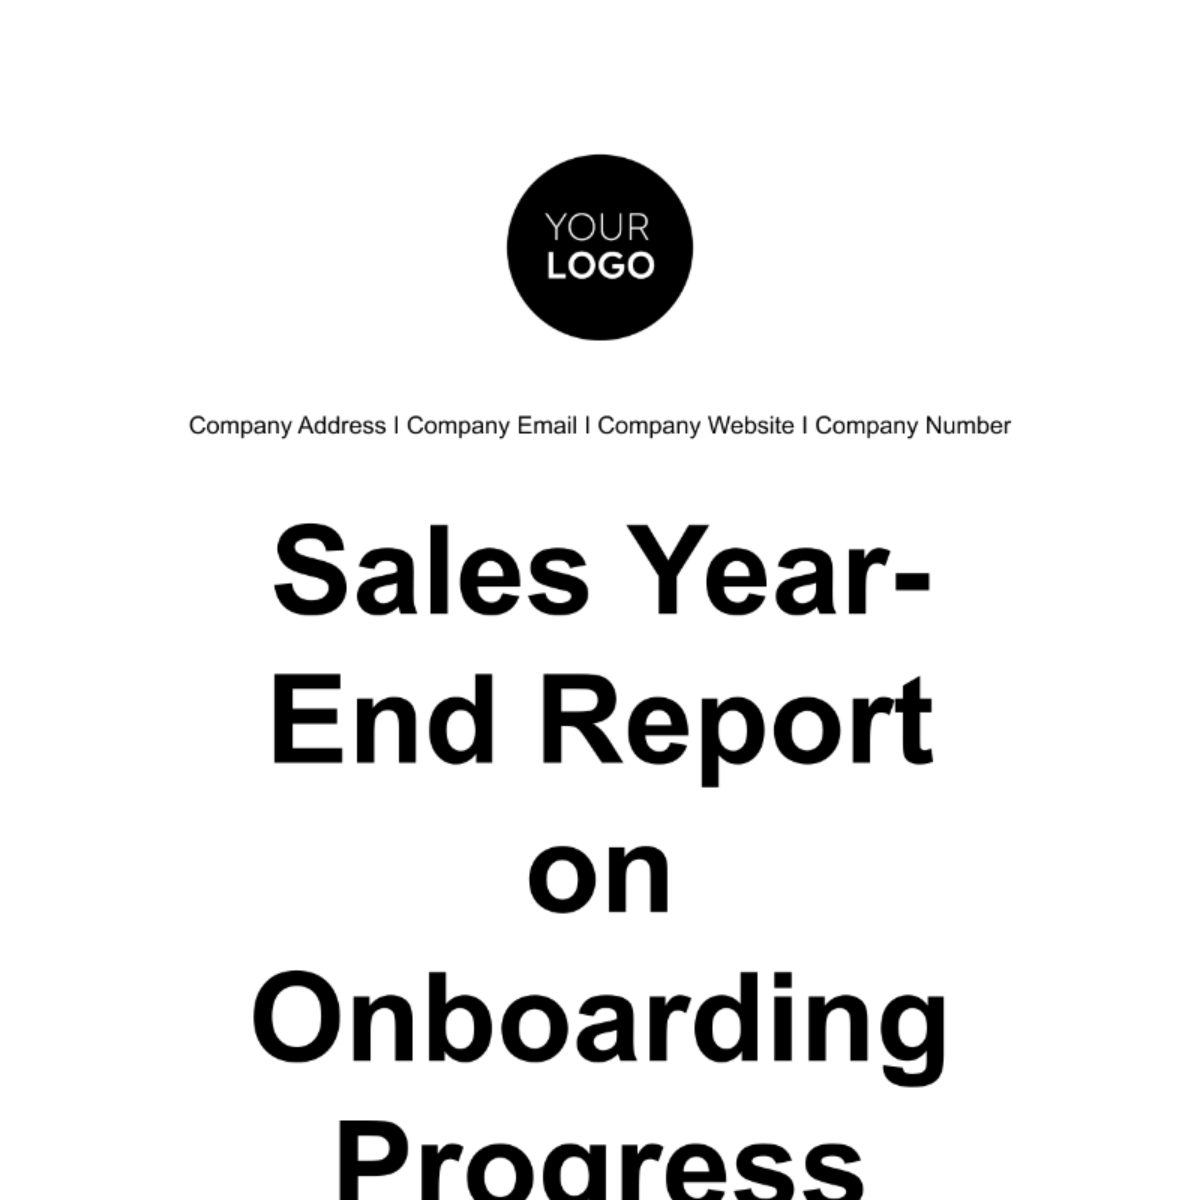 Free Sales Year-End Report on Onboarding Progress Template